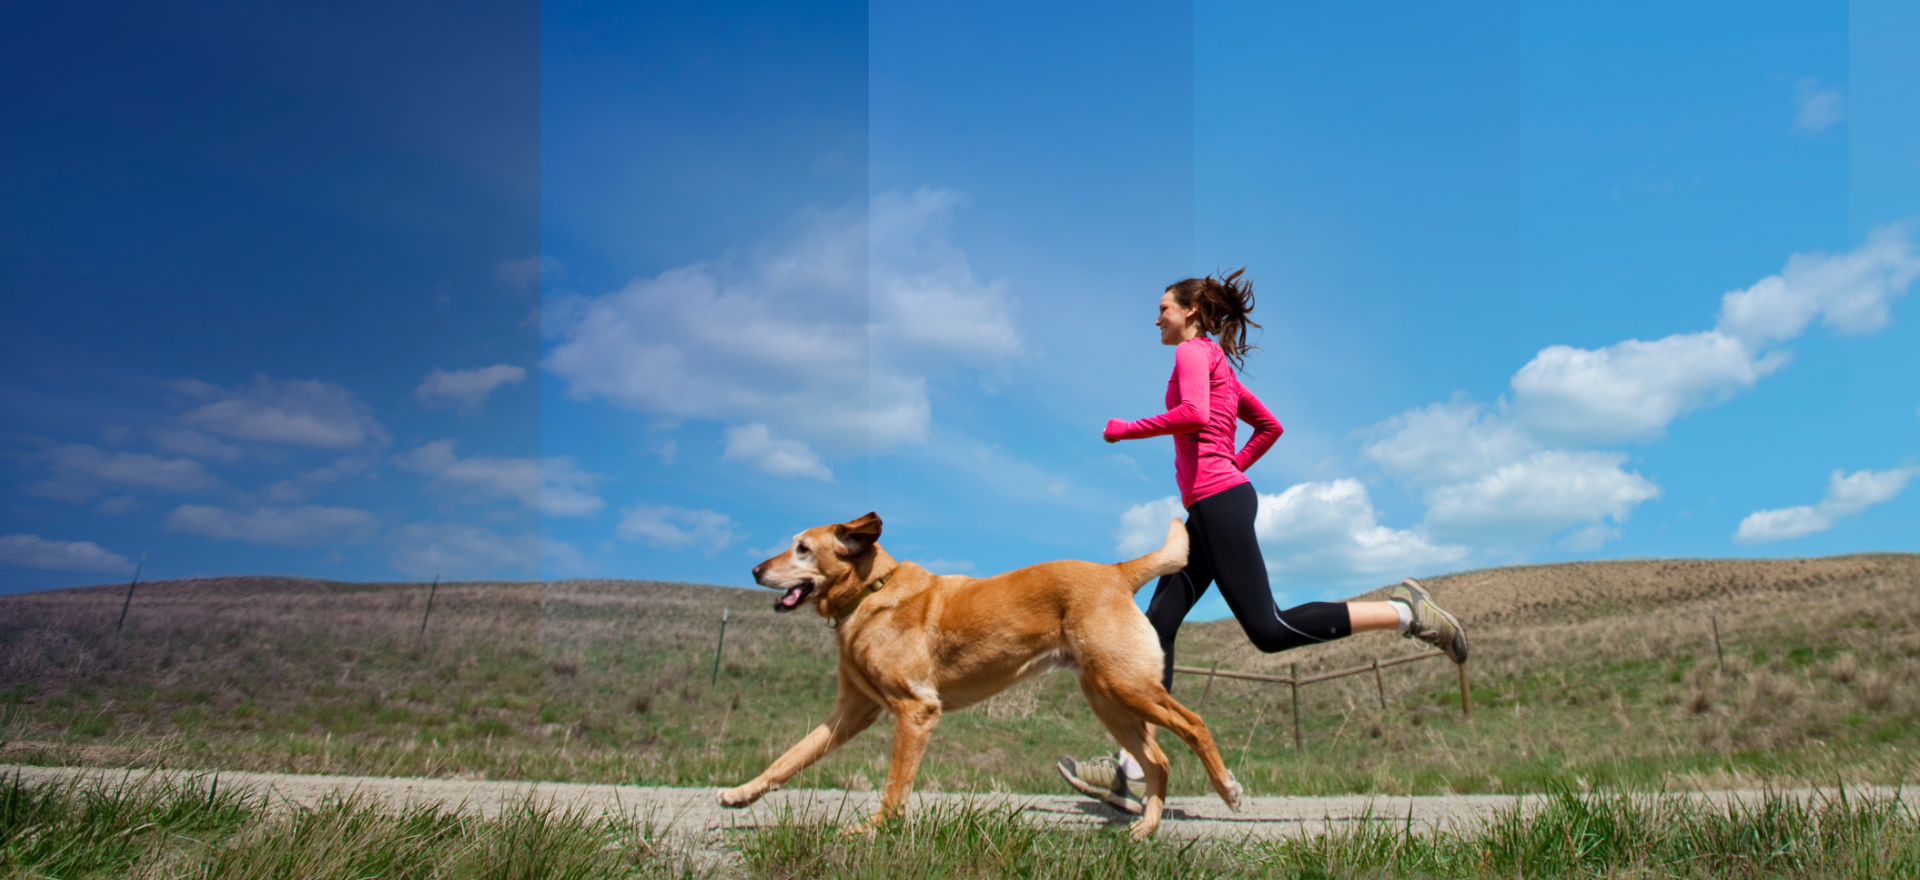 Woman and dog running on jogging path